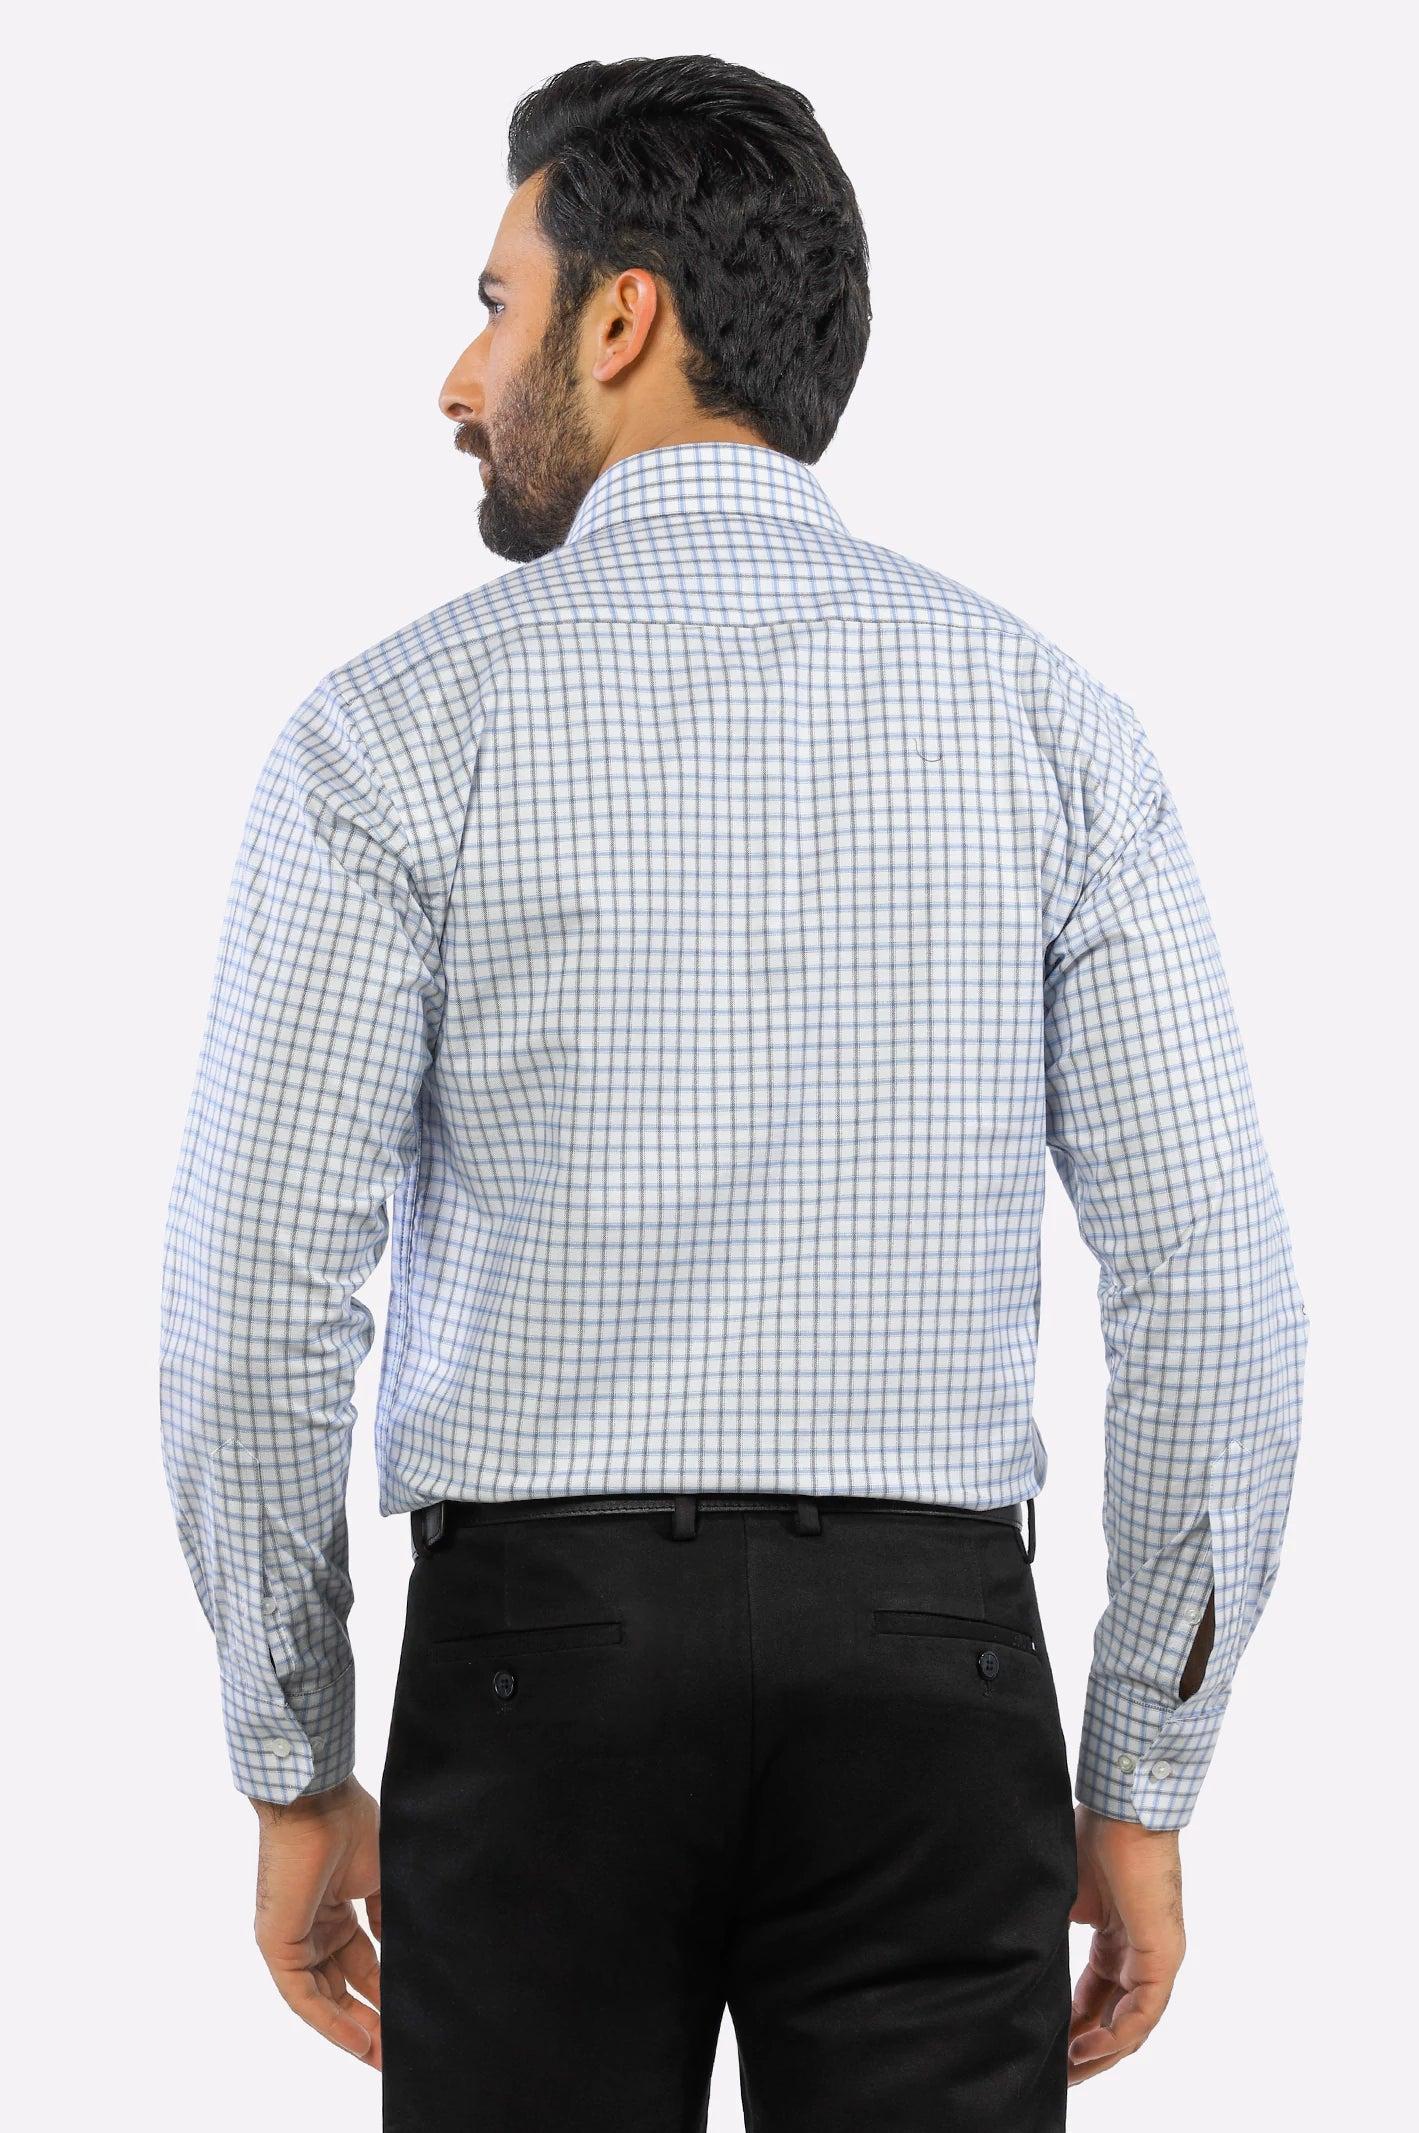 BLUE GRAPH CHECK | Generation - GENERATION MODERN | SHIRT DINERS FORMAL | modern THE MODJEN FOR For UNDEFINED the Modjen 